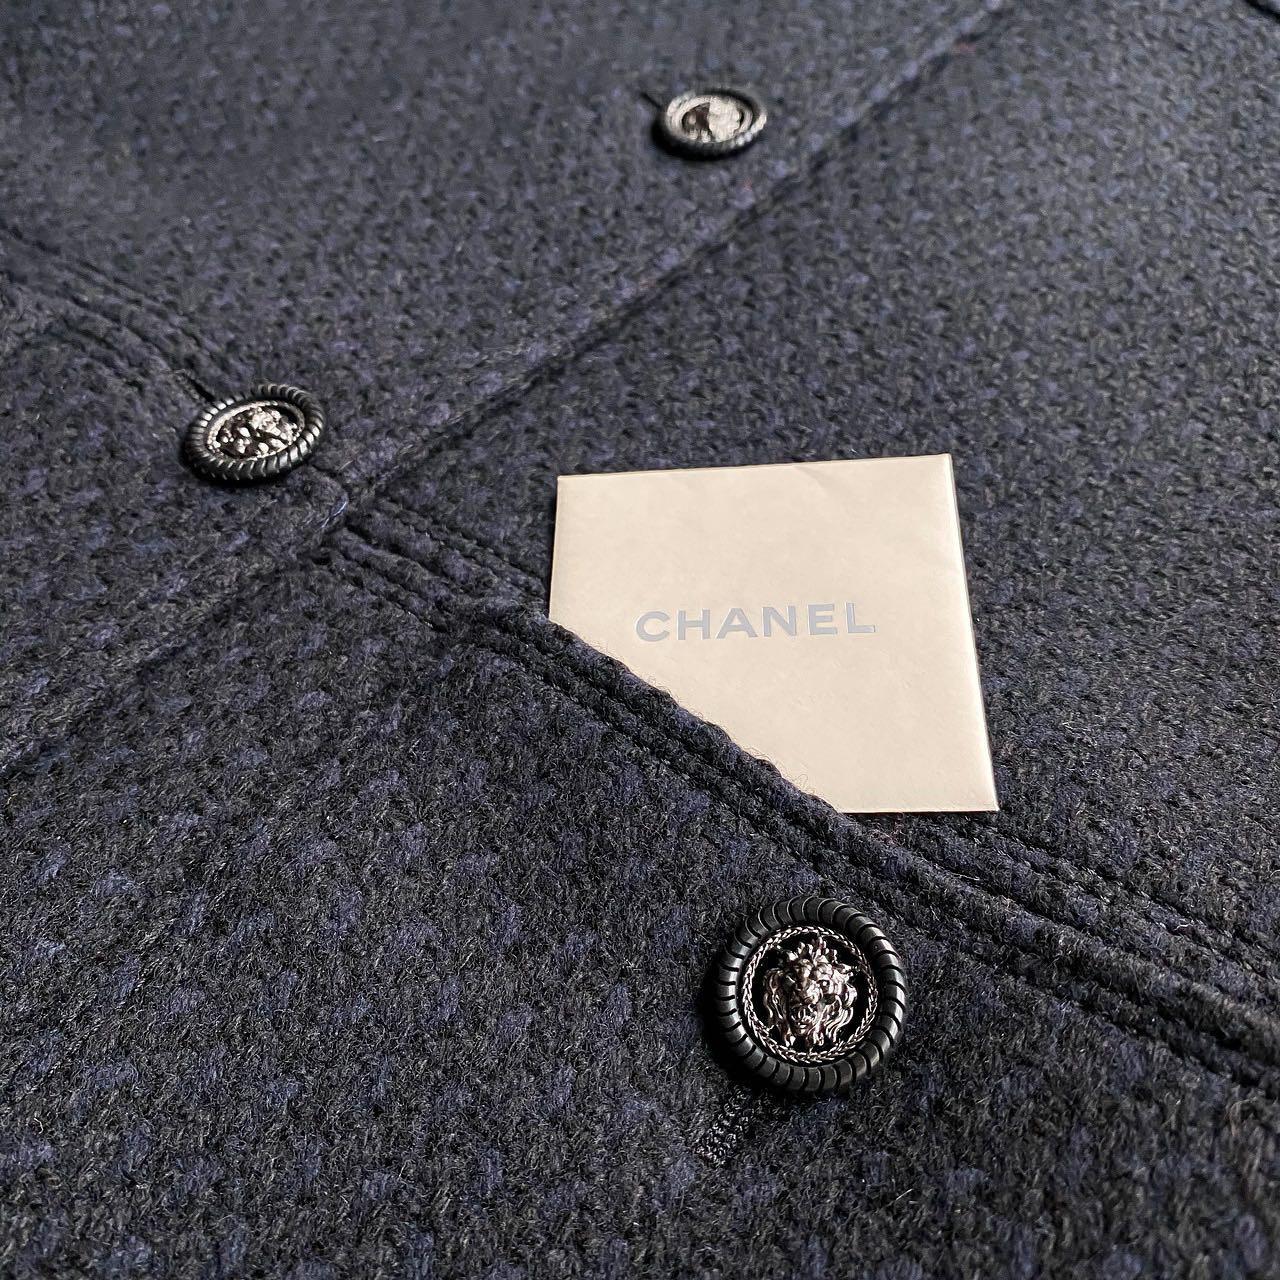 Stunning Chanel navy and black tweed coat from Paris / EDINBURGH Collection
Boutique price 8,980 $
- CC logo lionhead buttons
- tonal silk lining with camellias
Size mark 44 FR. Kept unworn.